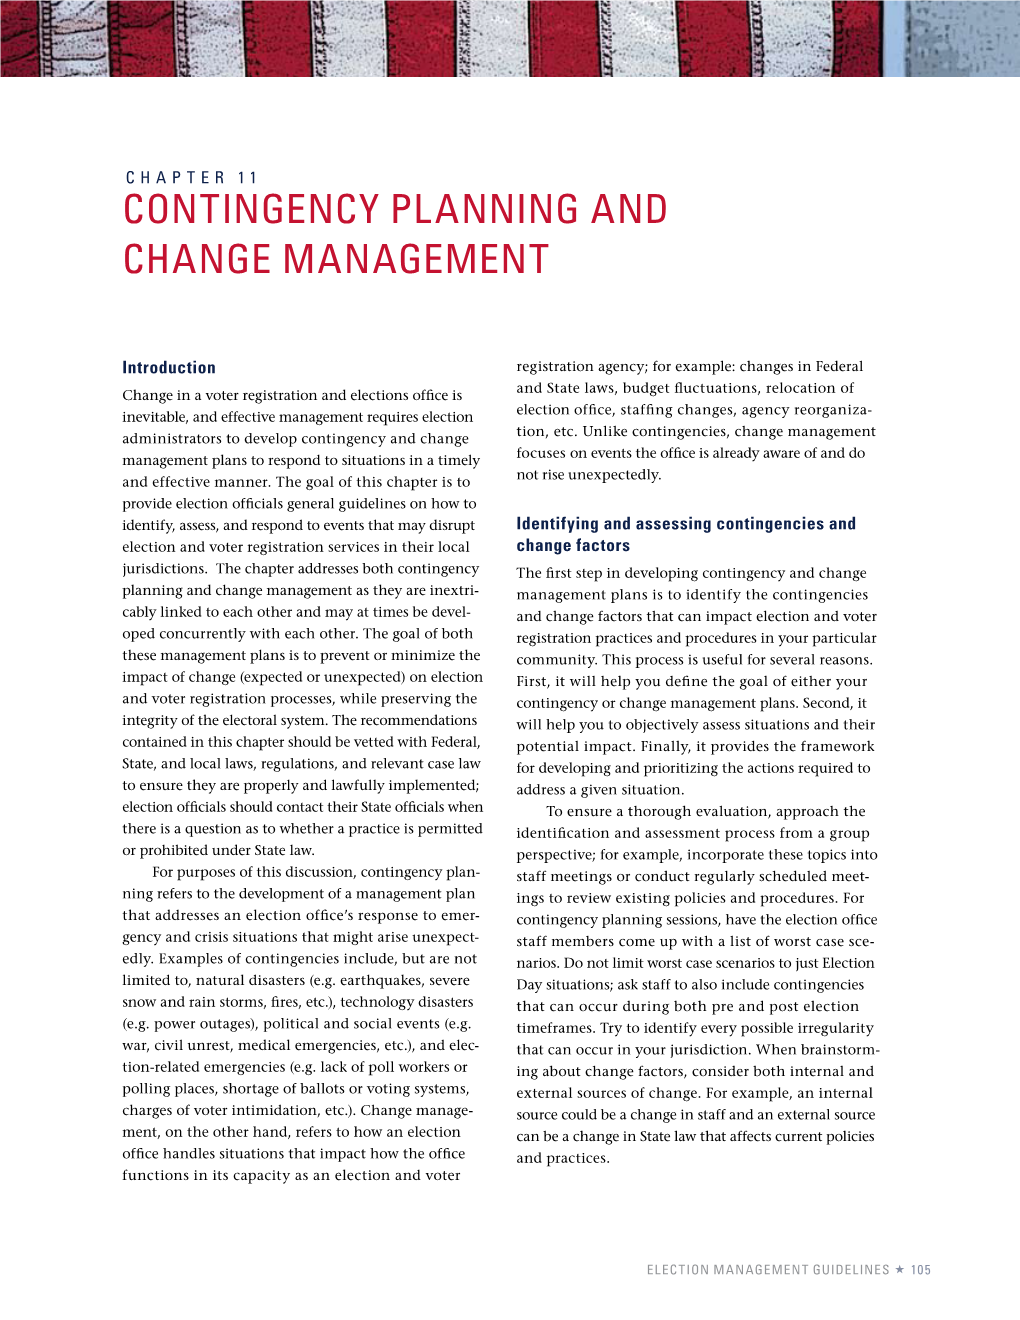 Contingency Planning and Change Management